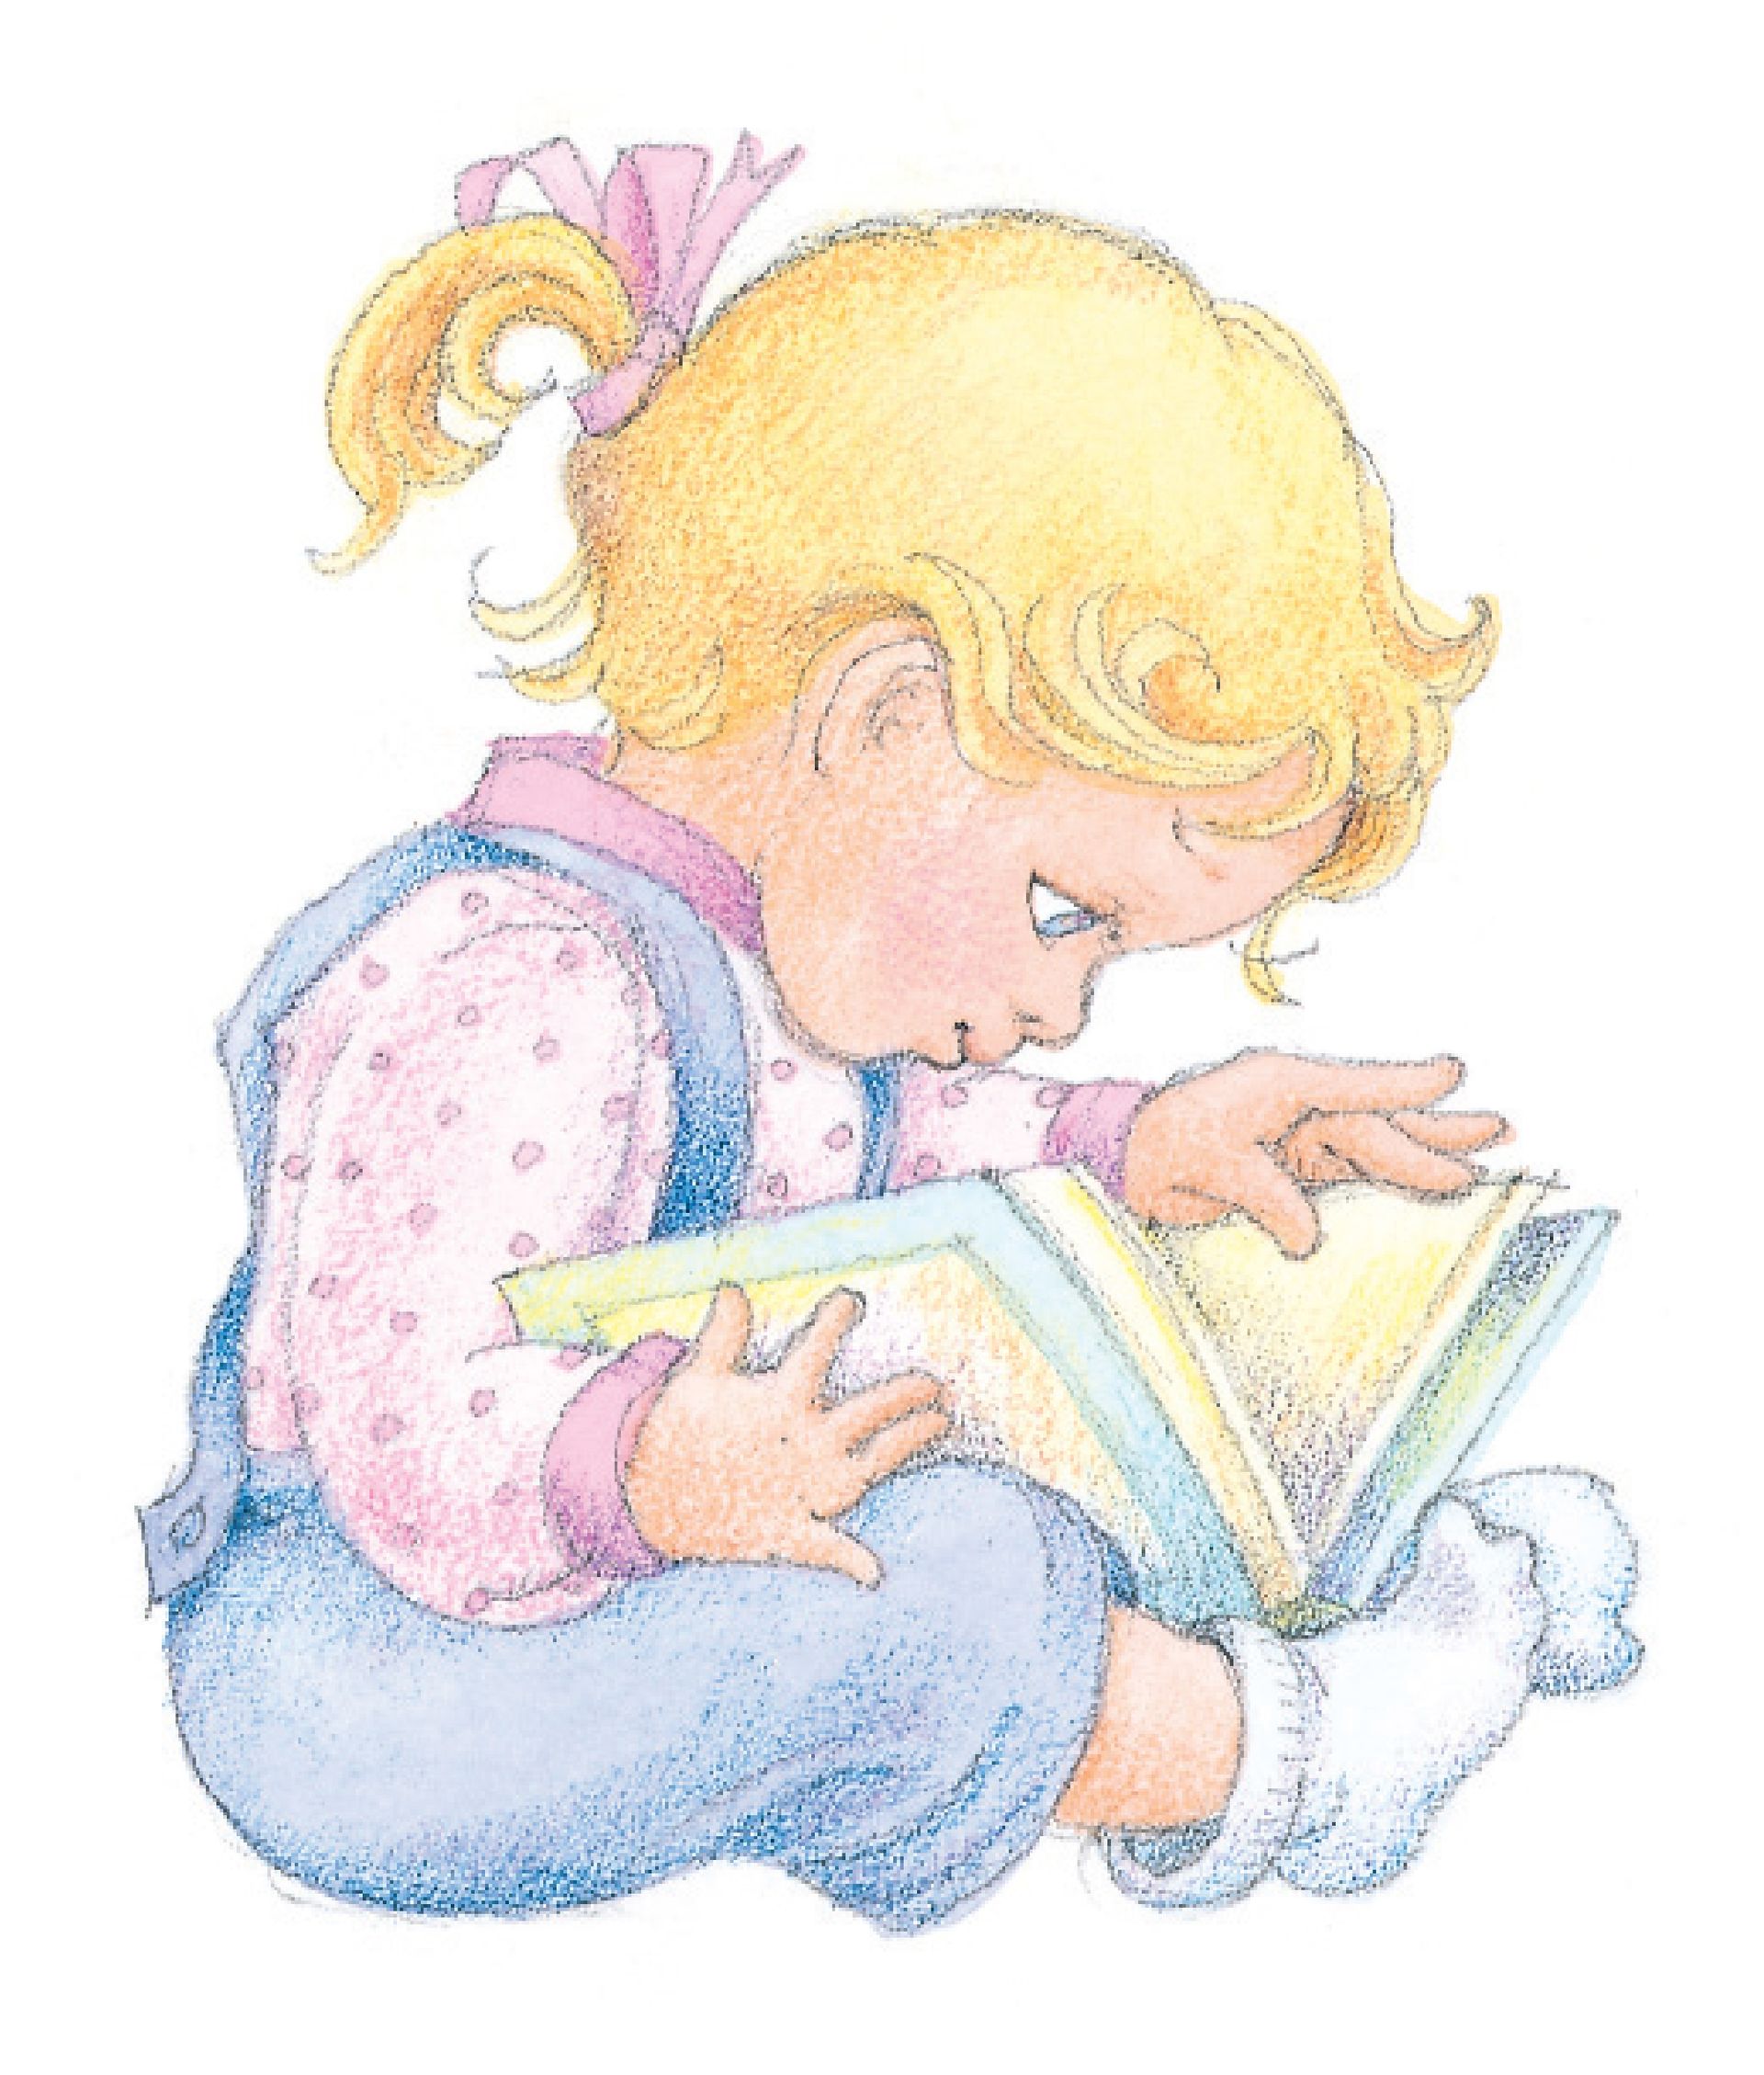 A small girl looking at a book. From the title page of the Children’s Songbook; watercolor illustration by Phyllis Luch.